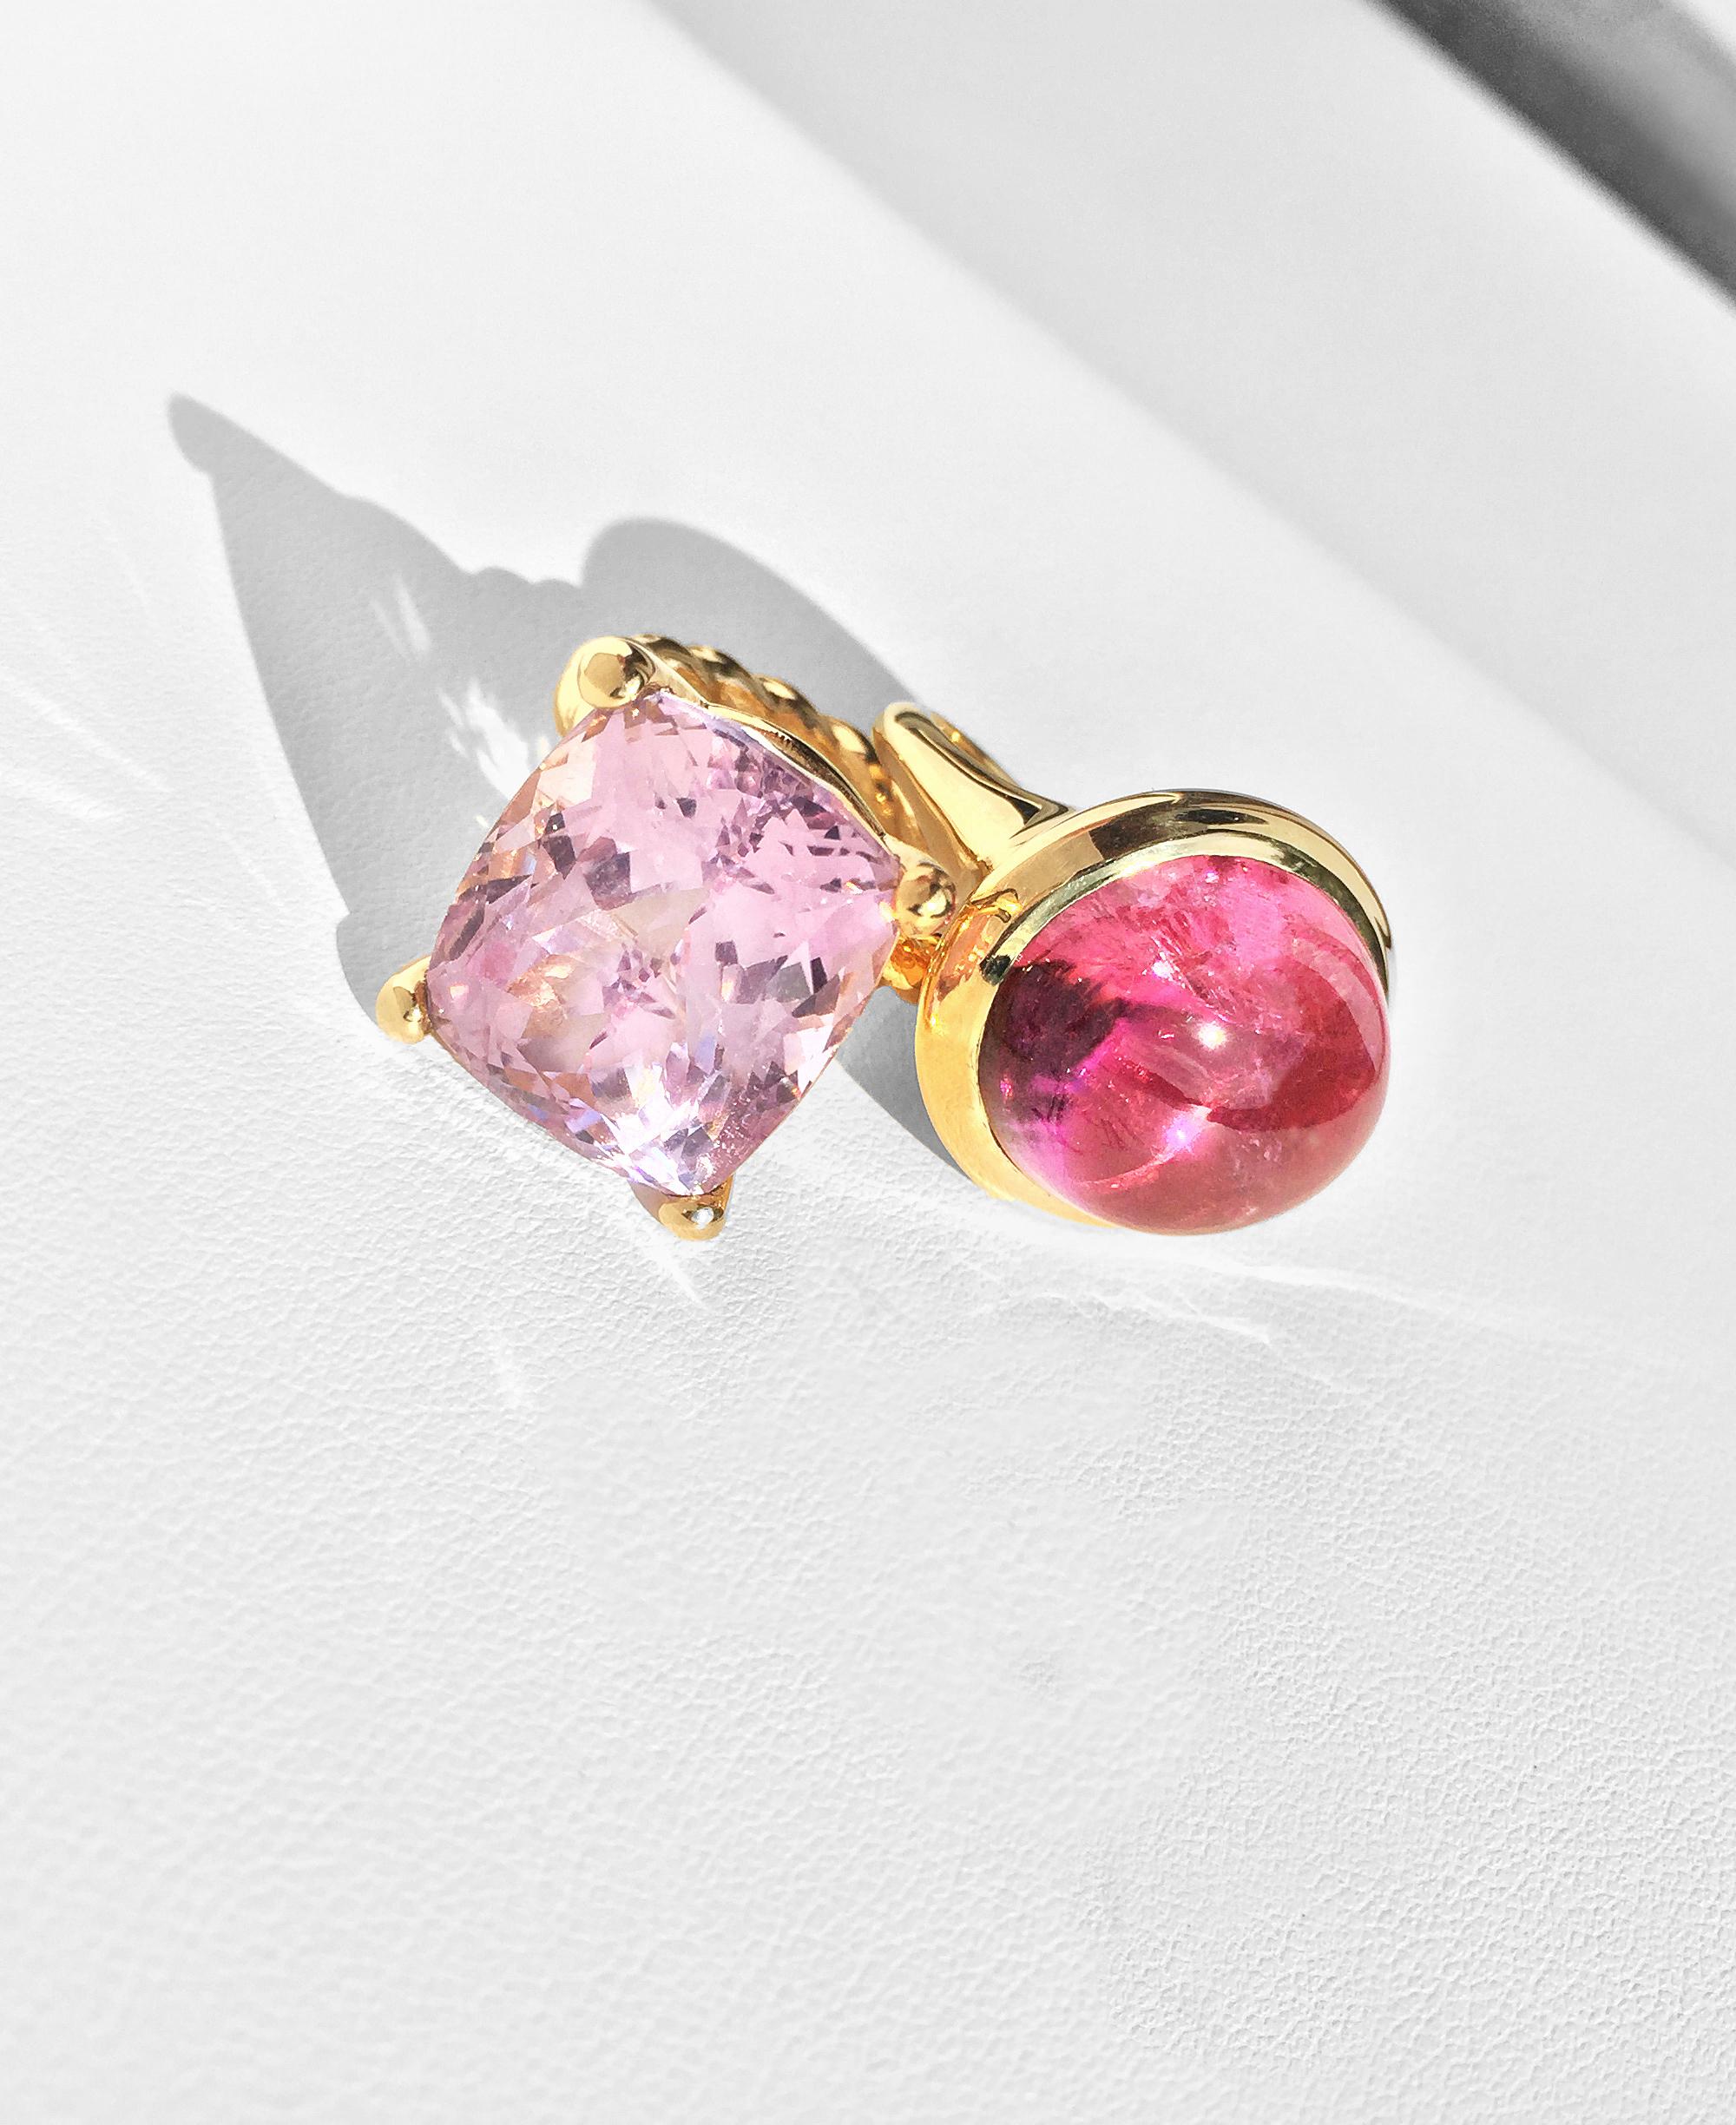 Oval Cabochon Pink Tourmaline Ring in 18 K Yellow Gold For Sale 4